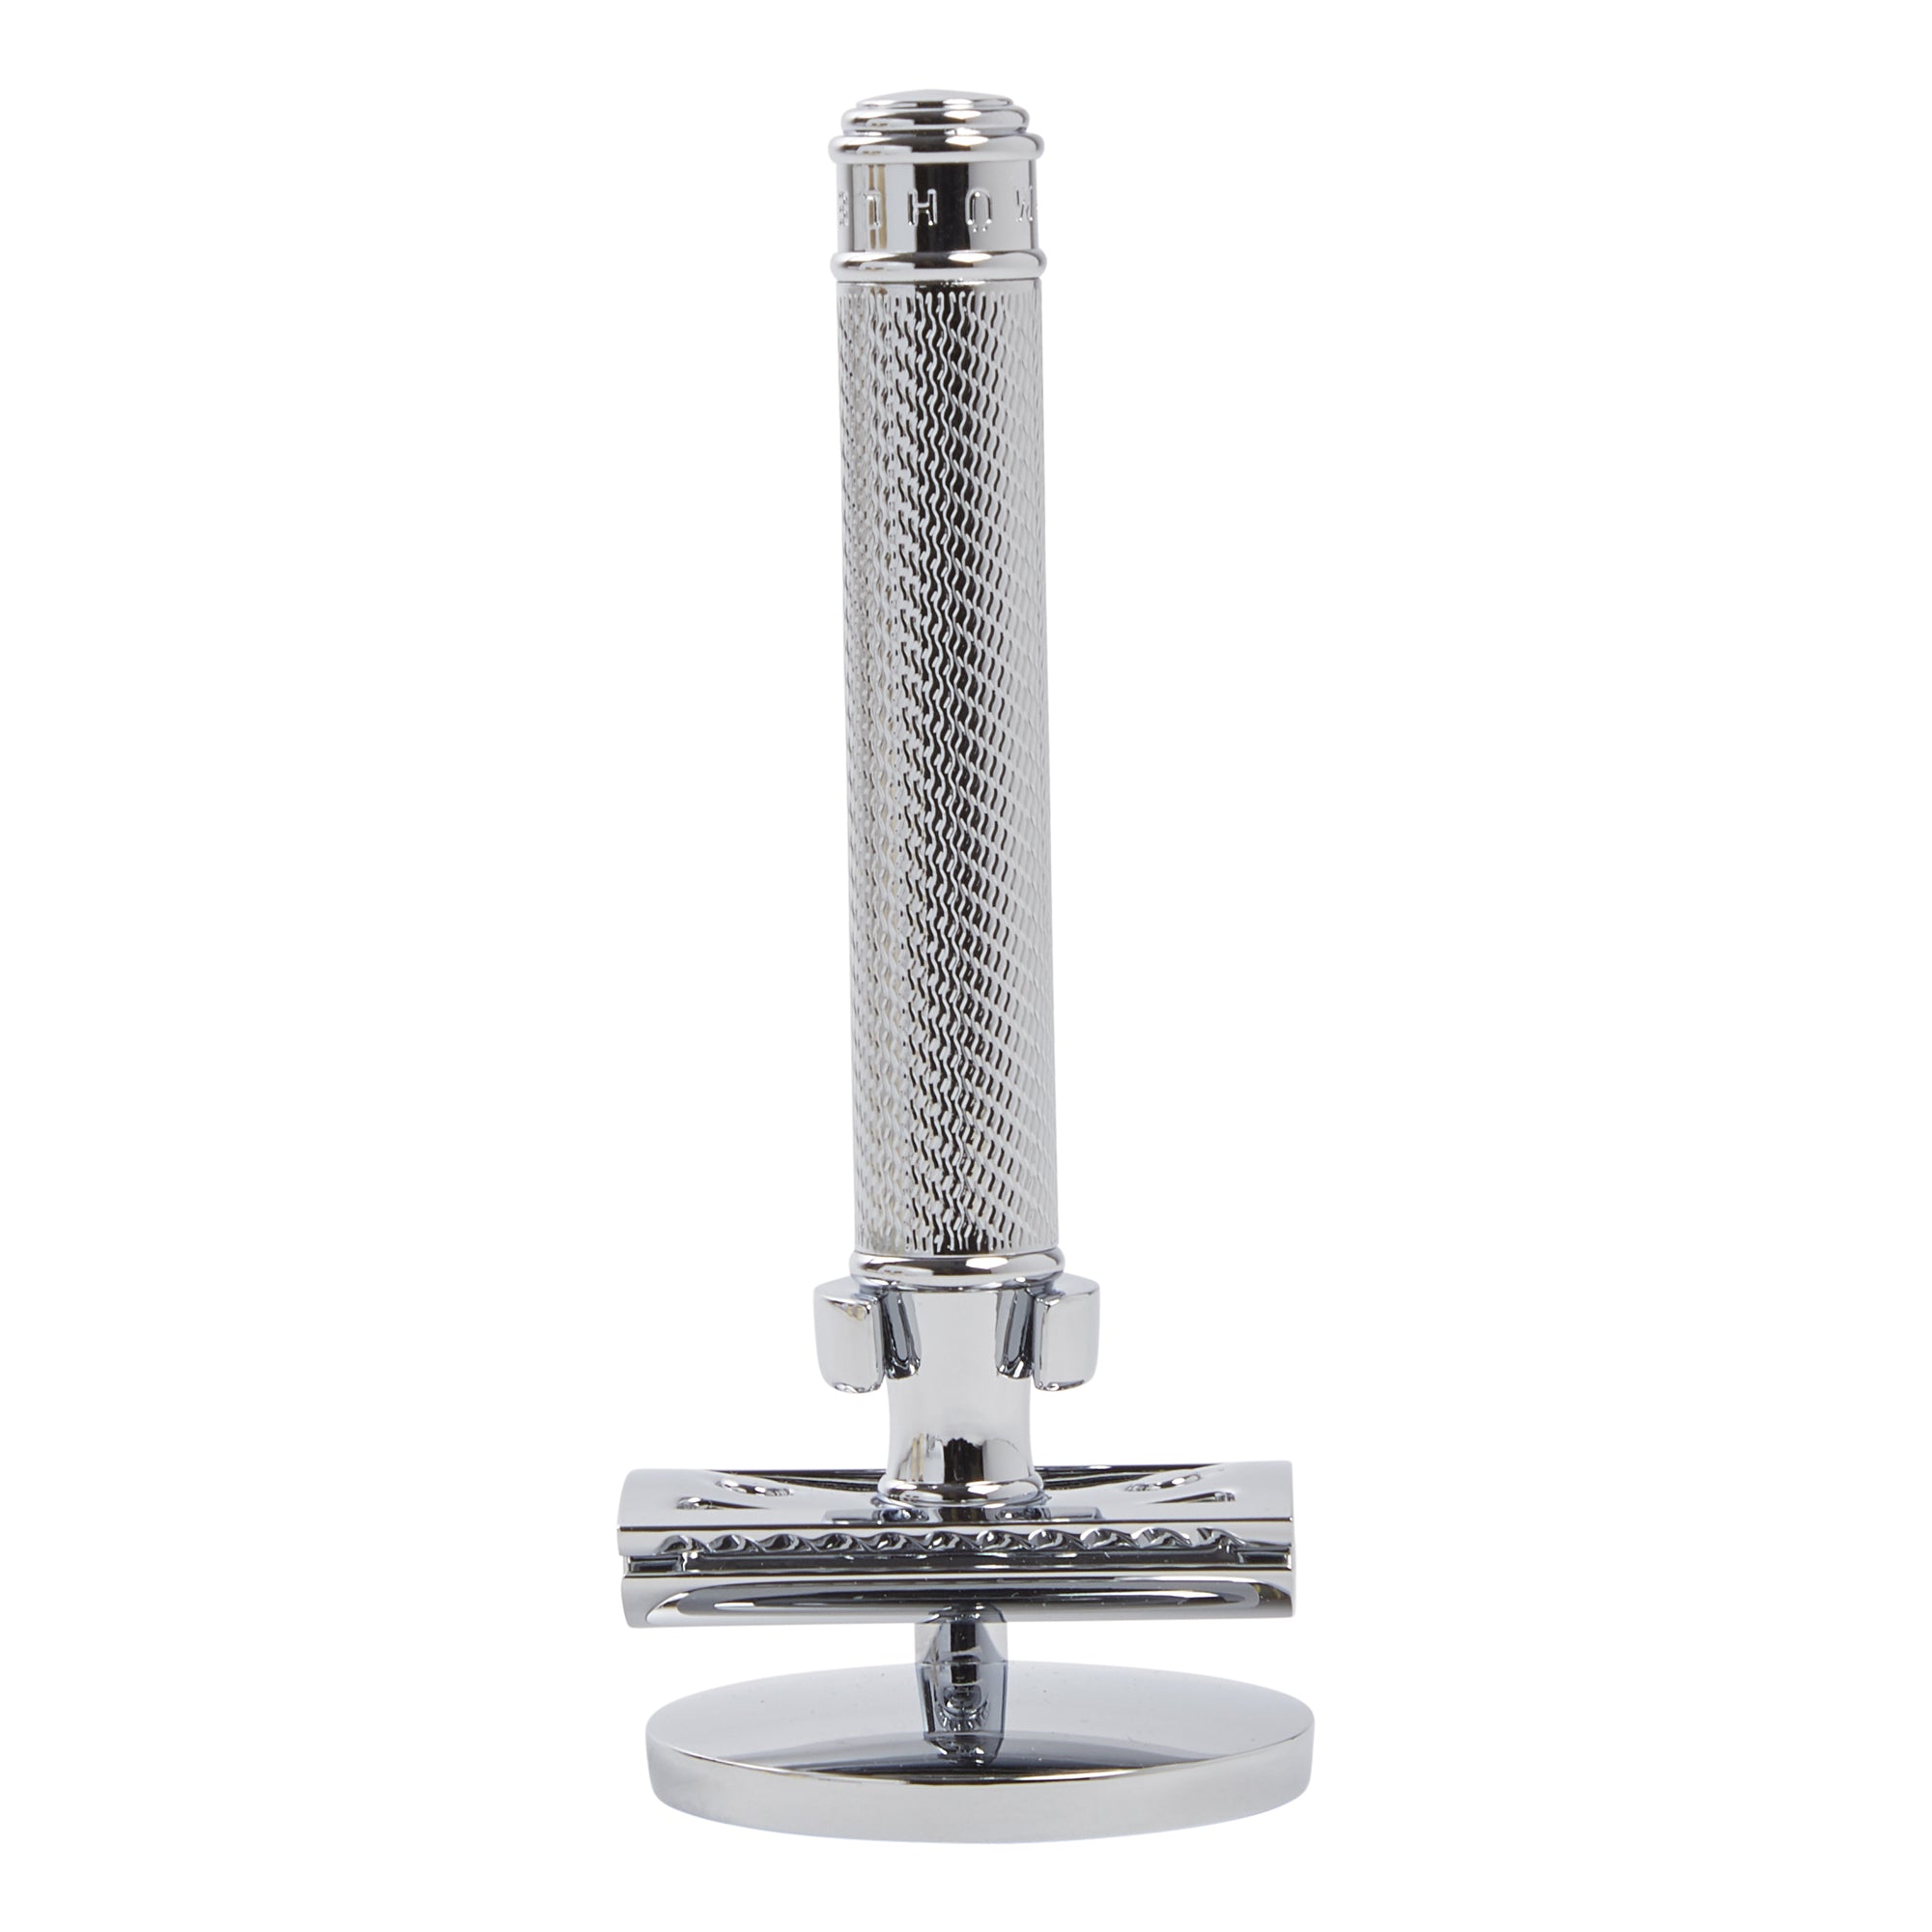 A Muhle Safety Razor Stand by KirbyAllison.com on an elegant man's bathroom countertop.